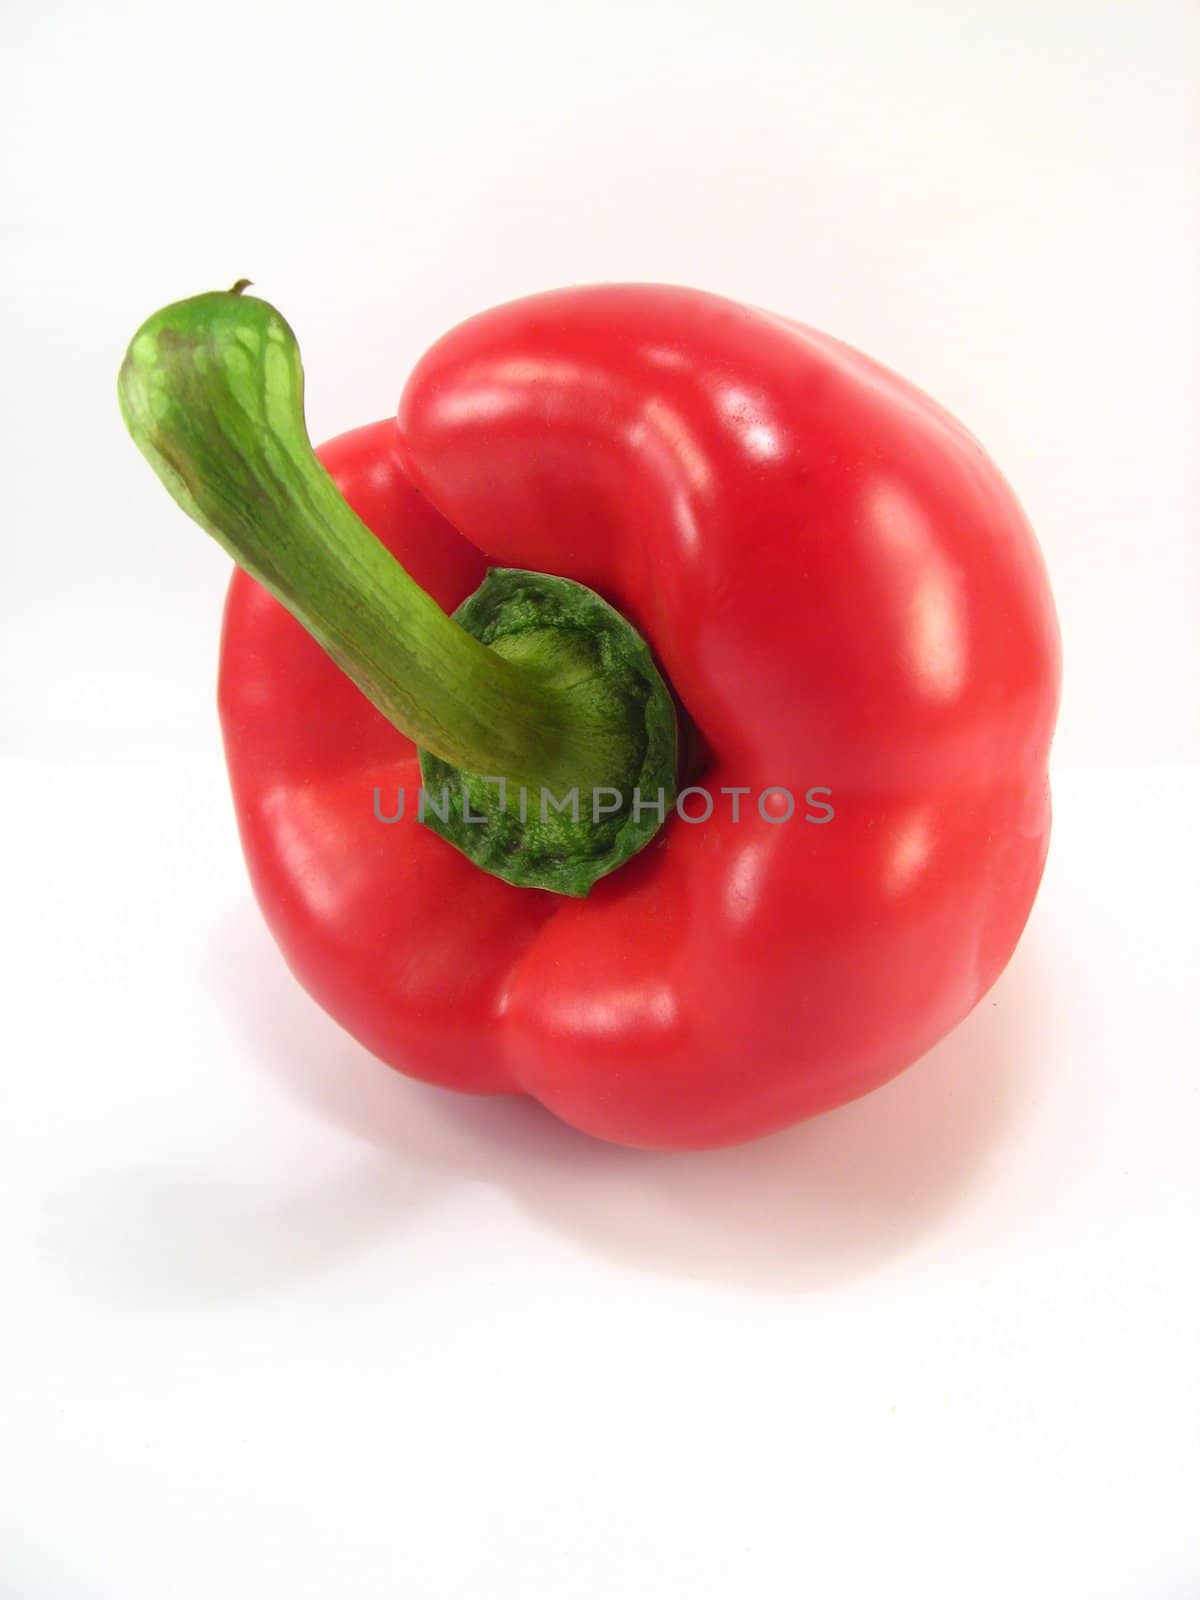 a red pepper on a white background